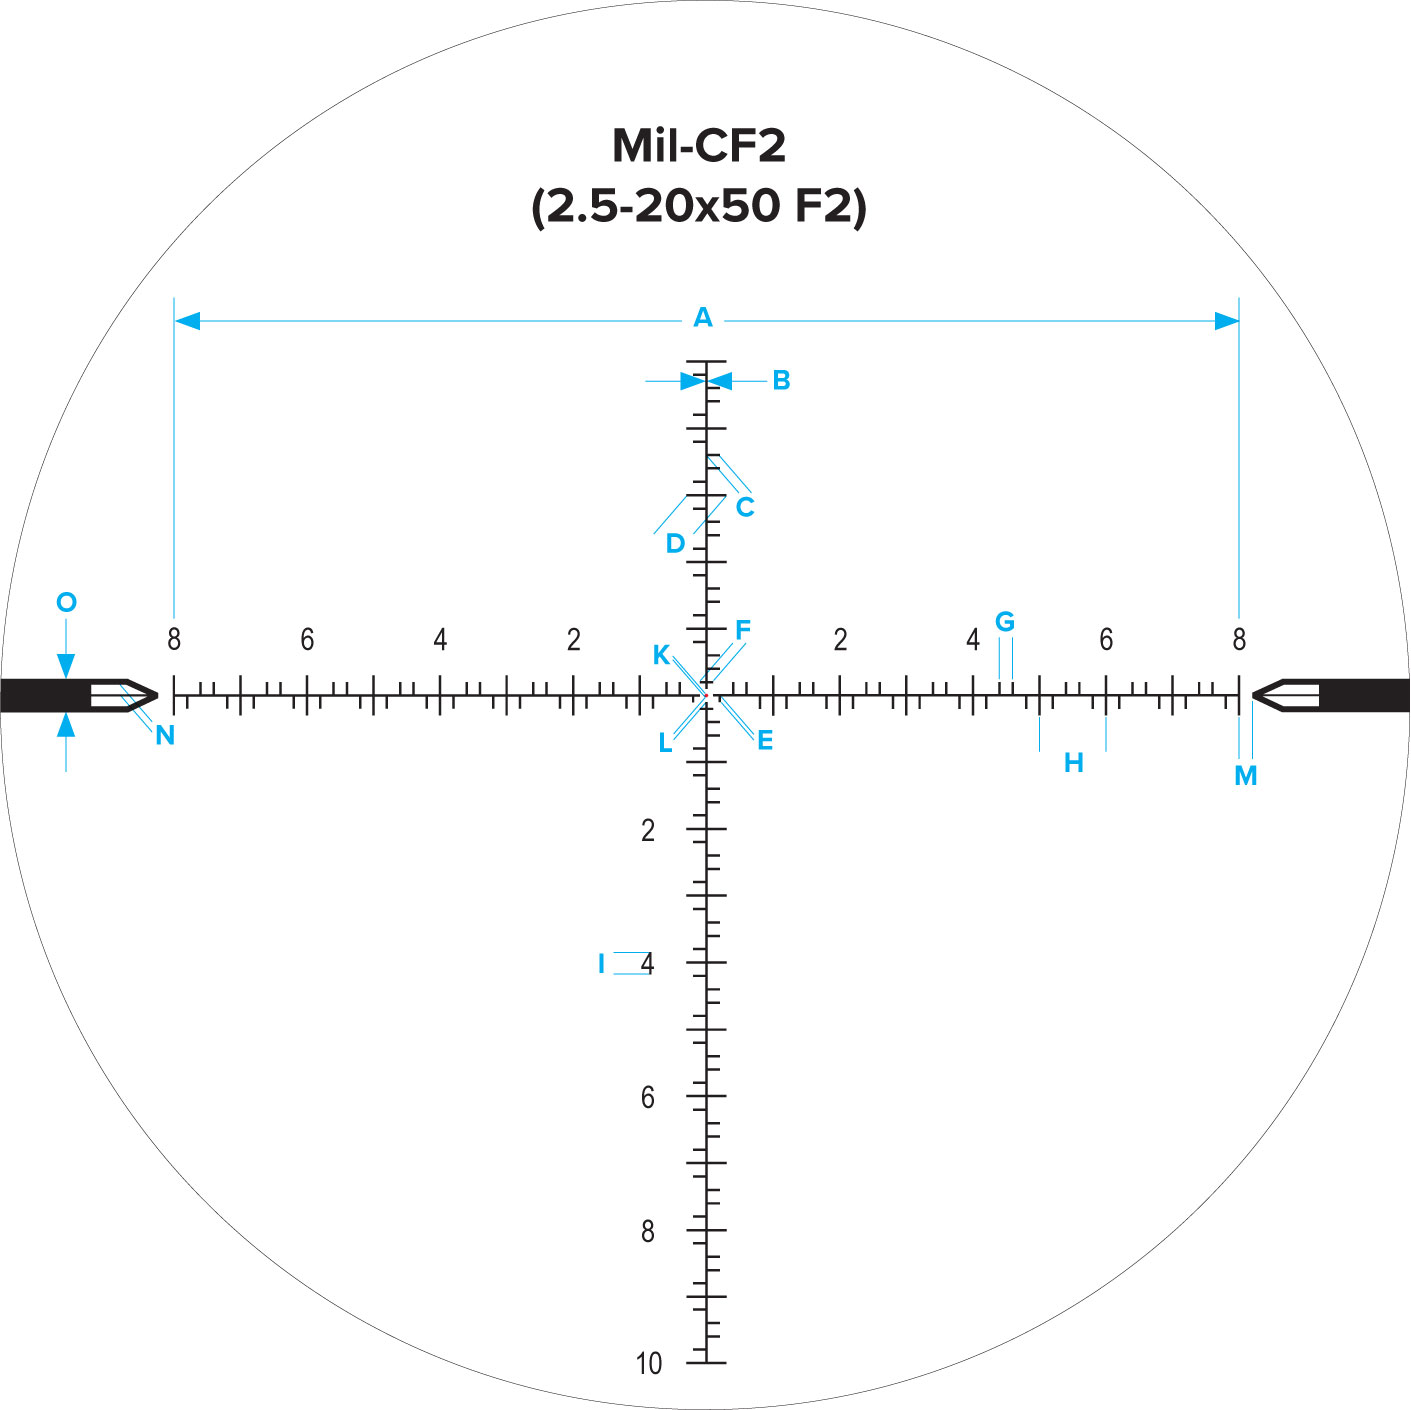 Reticle_Spec_Sheets - NF_MIL-CF2-25-20x_Dimensions